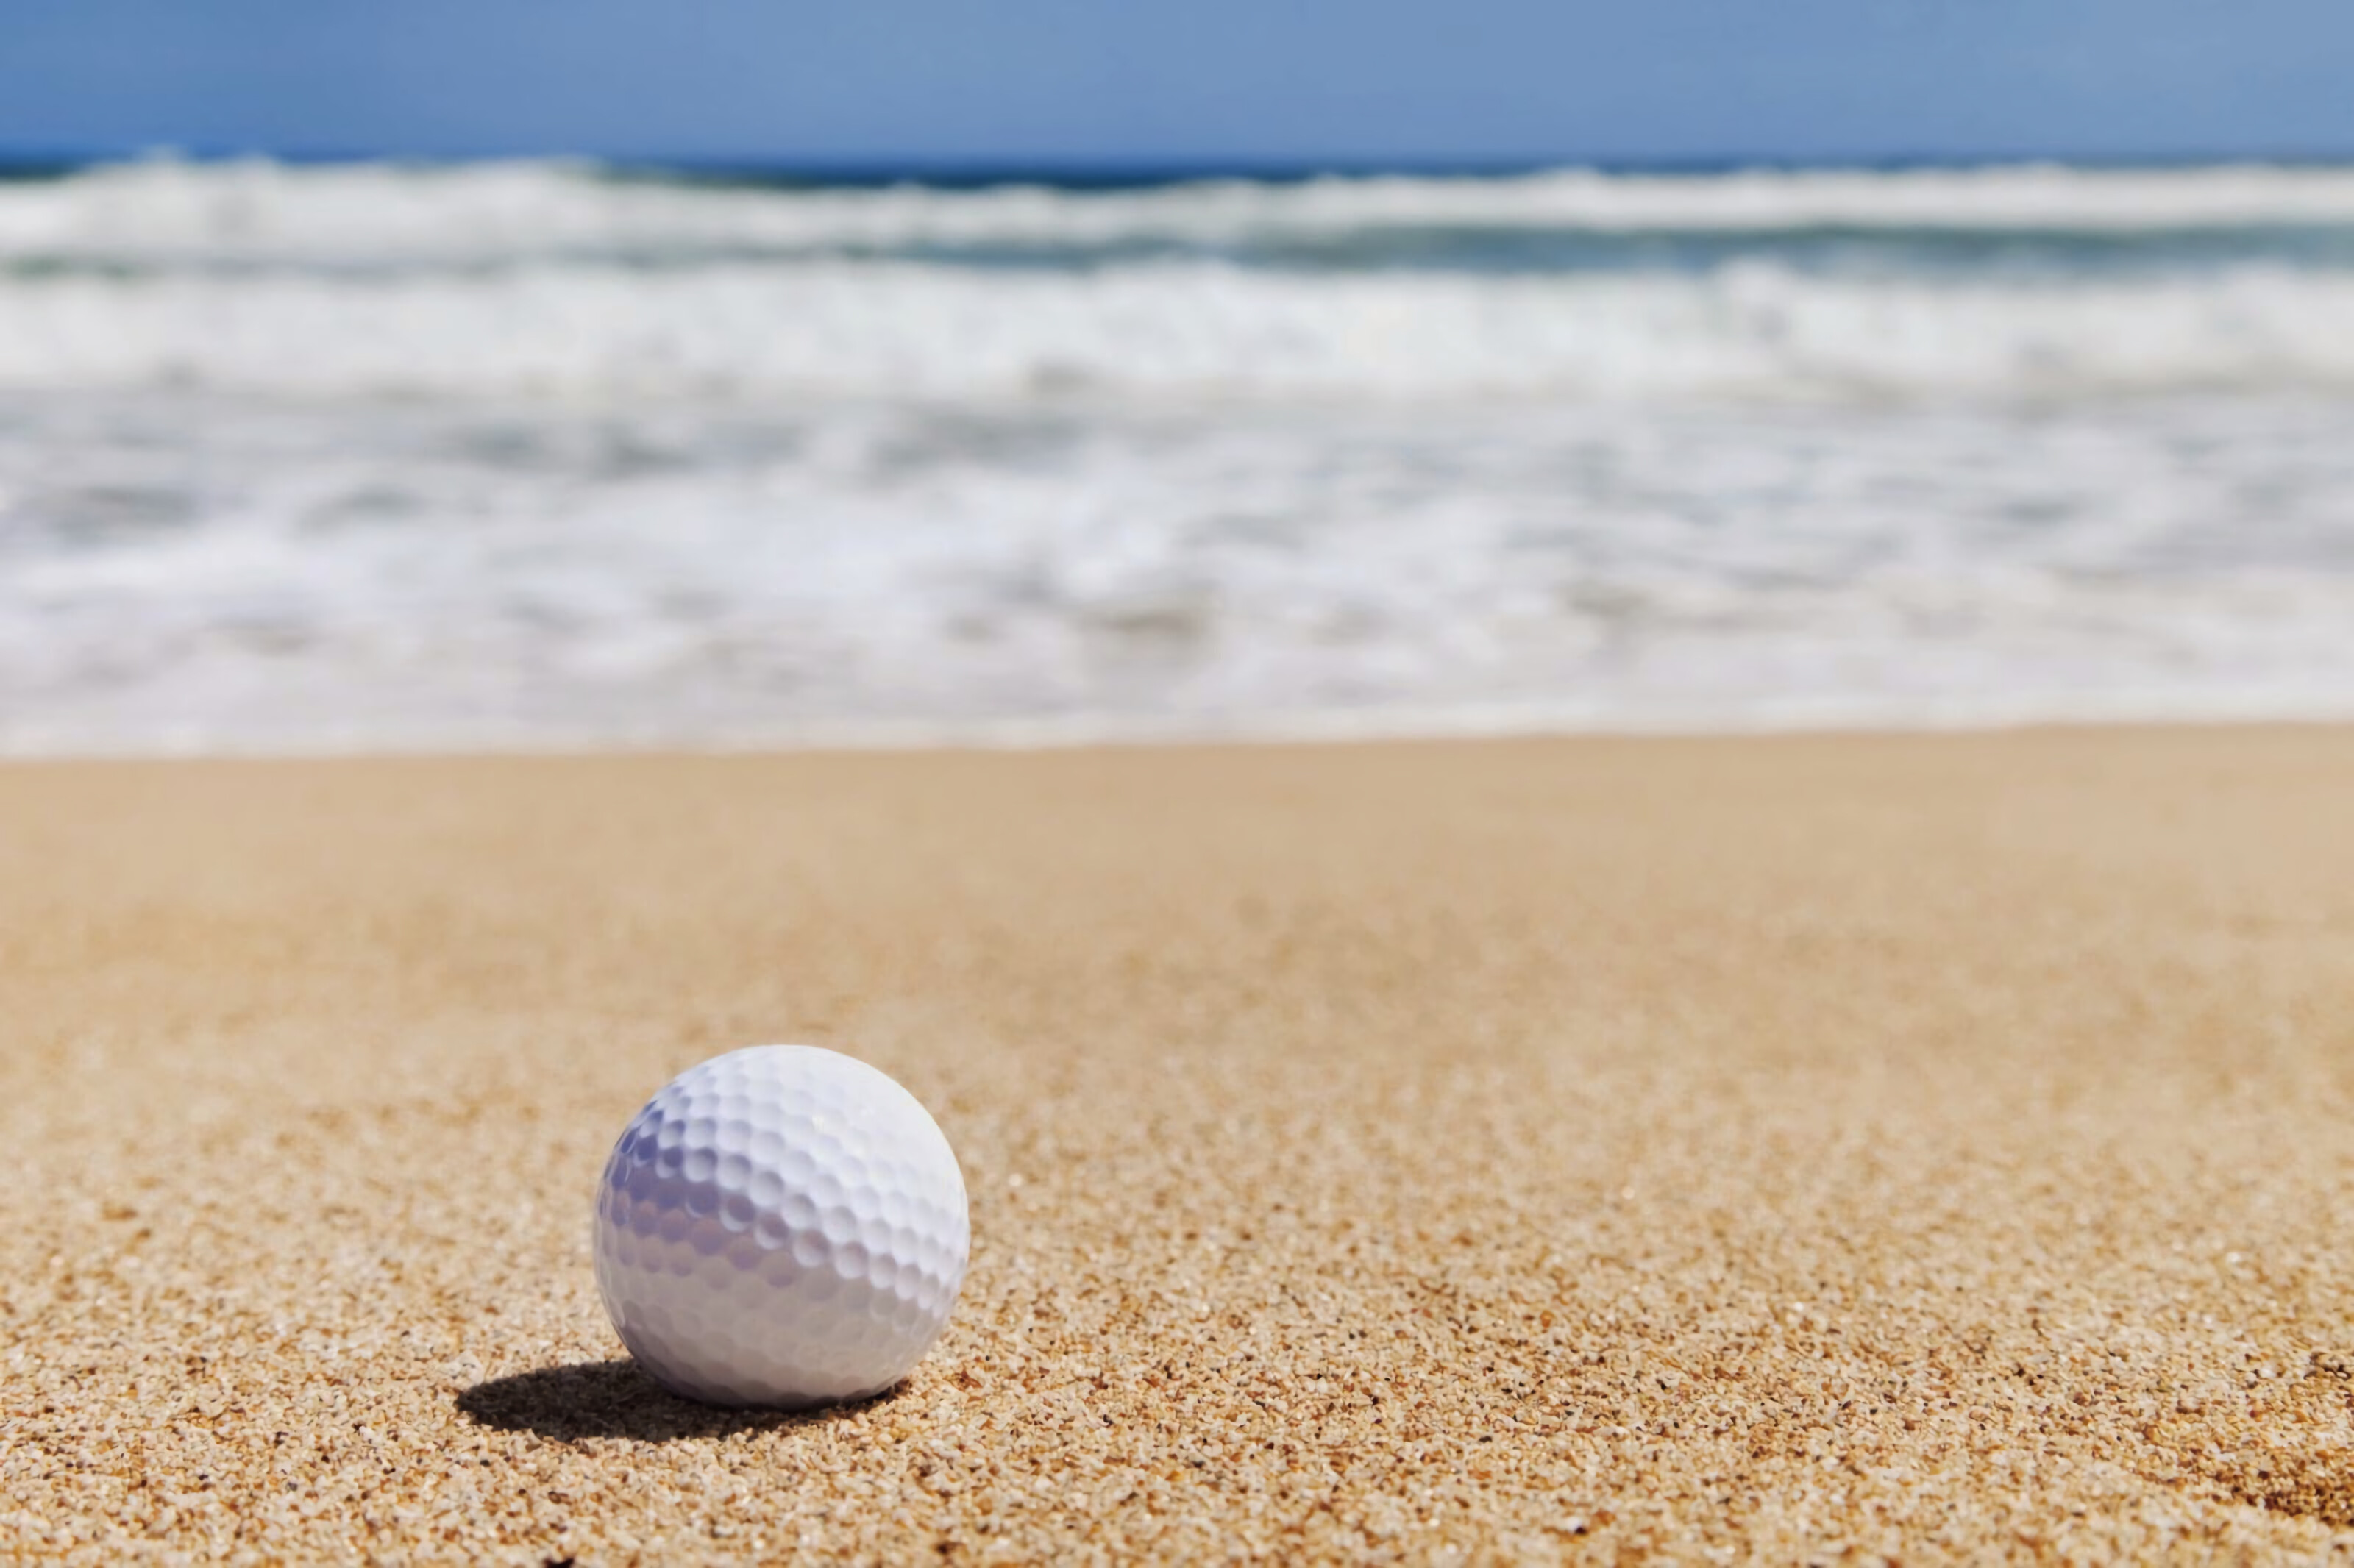 Beach Golf: A club-and-ball sport played on sandy surfaces, Coast. 3200x2140 HD Background.